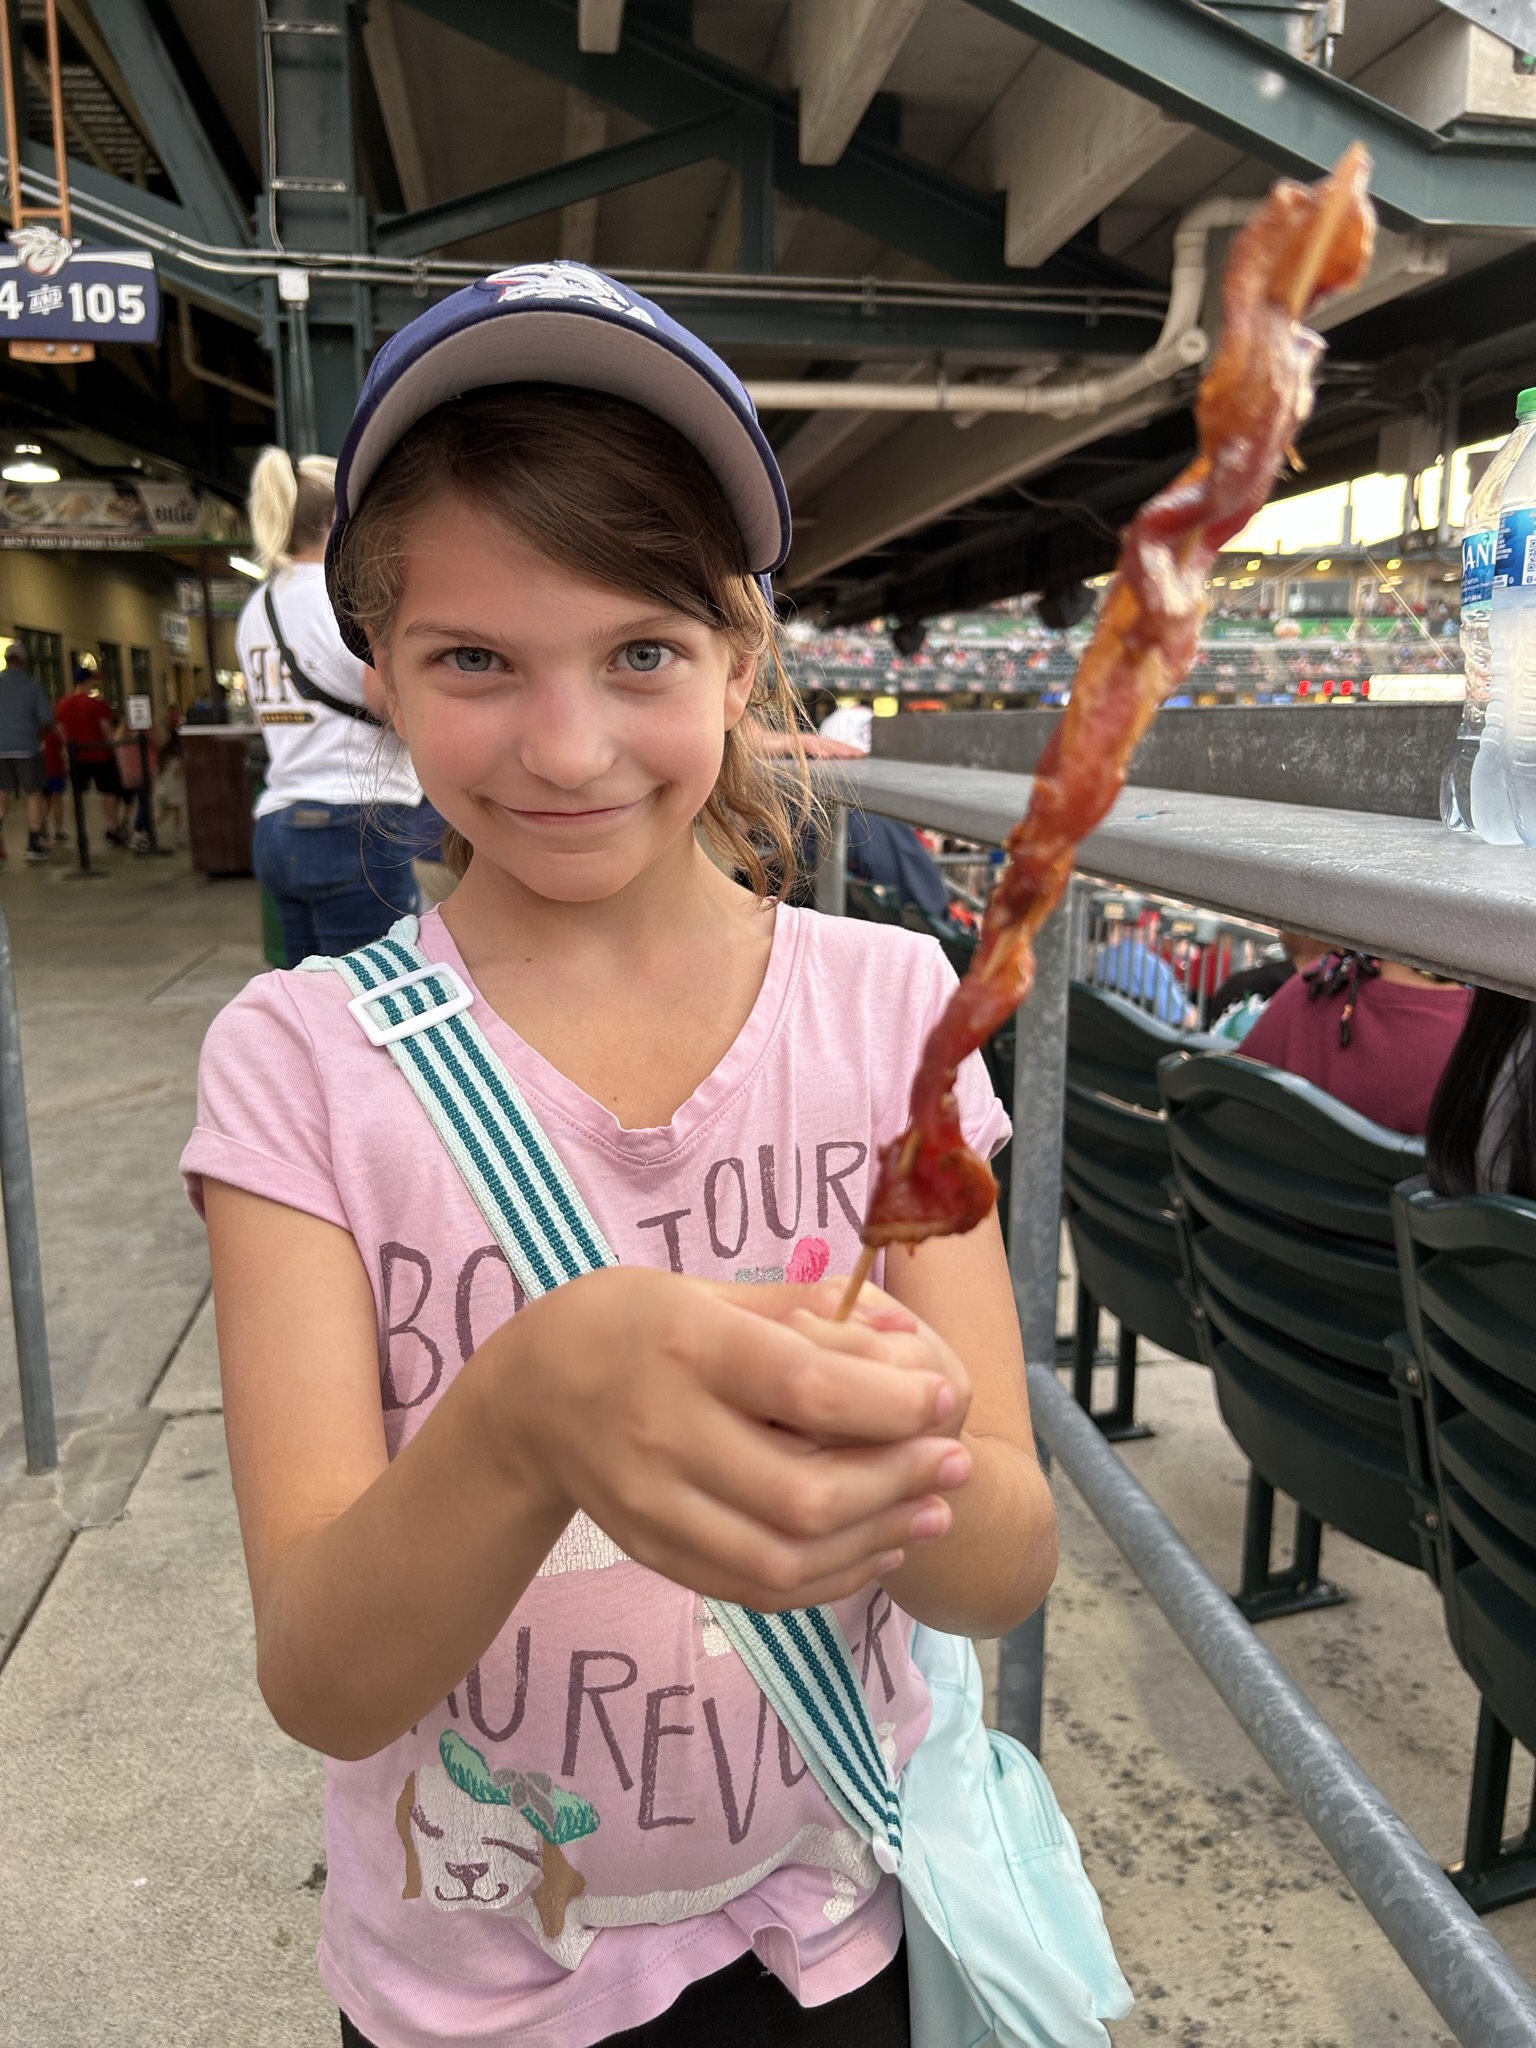 Candied Bacon on a Stick